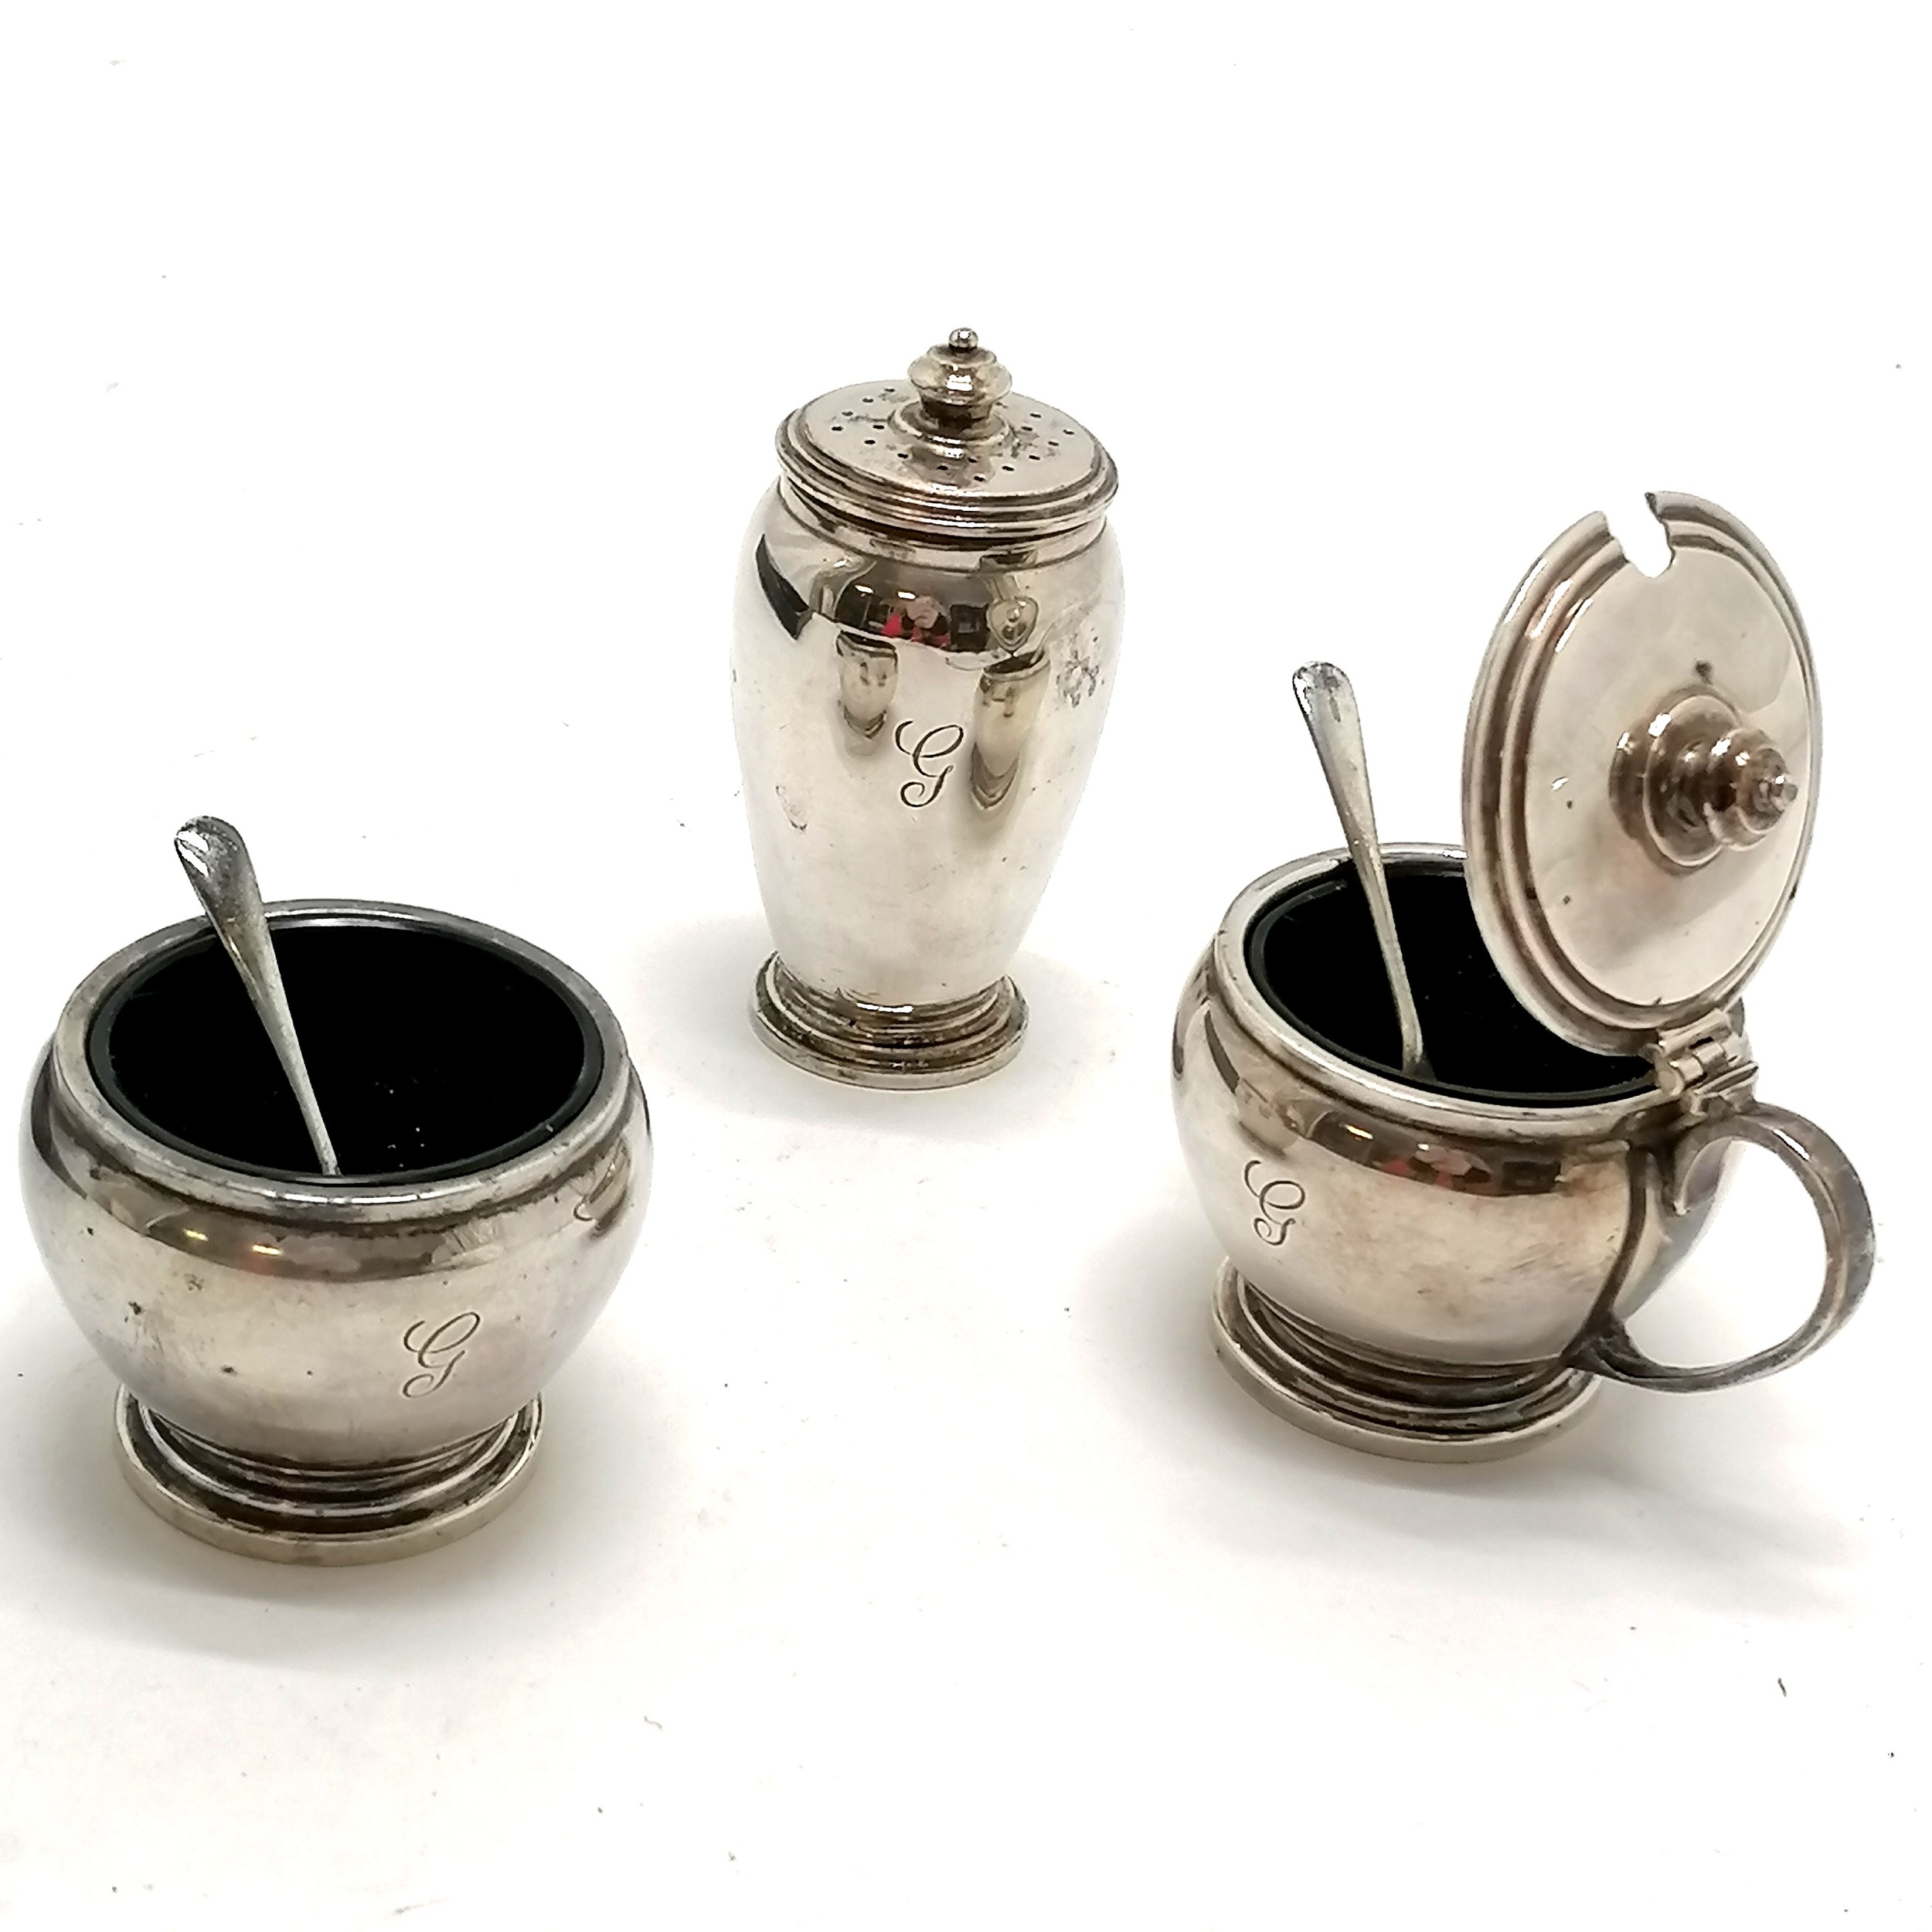 1948 cased sterling silver cruet set (with blue glass liners) by Adie Brothers Ltd - pepper 7.5cm - Image 2 of 3